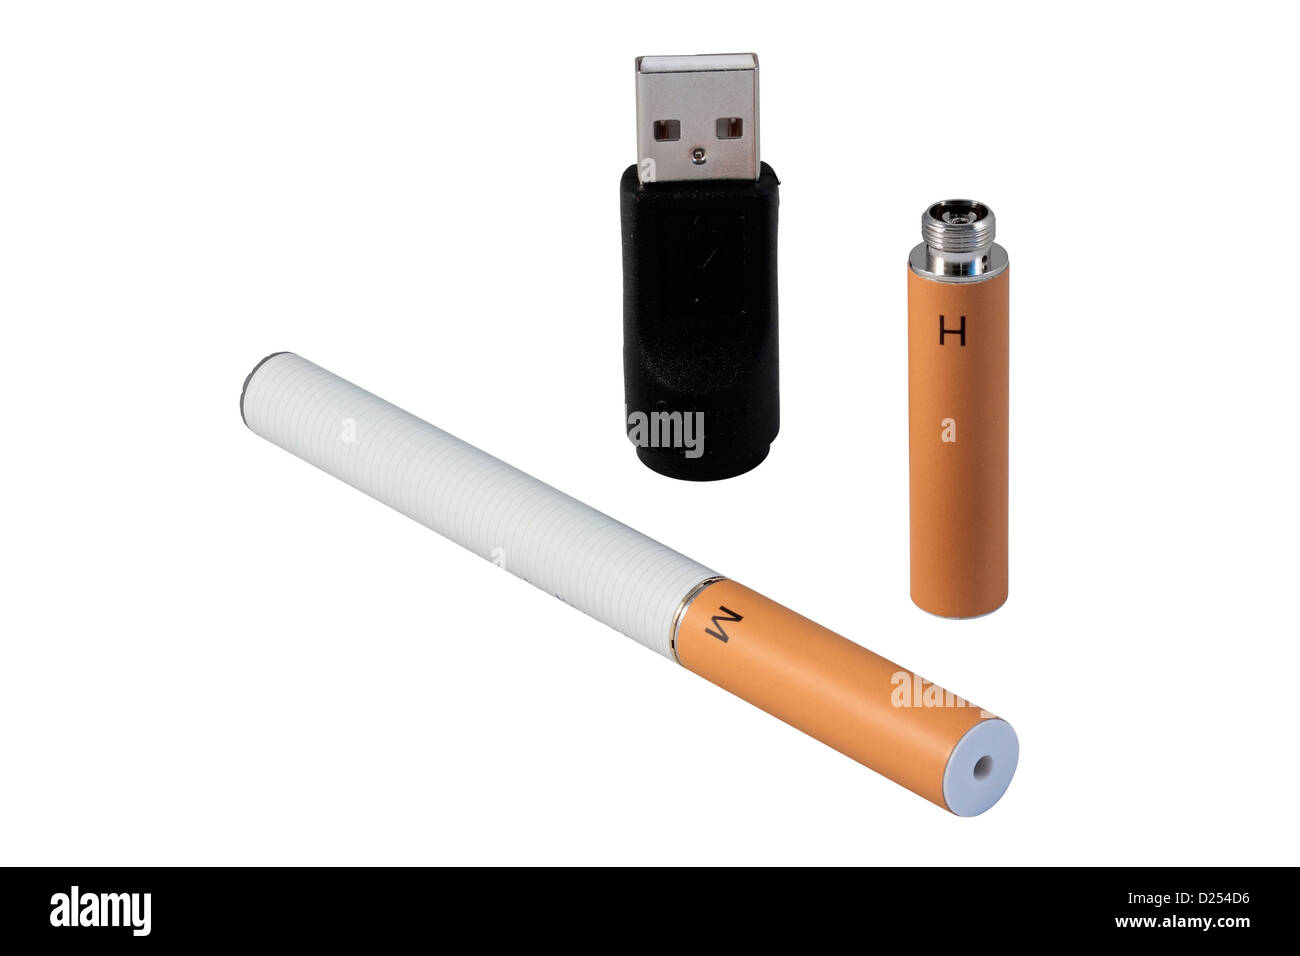 e cigarette, battery, nicotine cartridge and USB charger isolated on white background Stock Photo